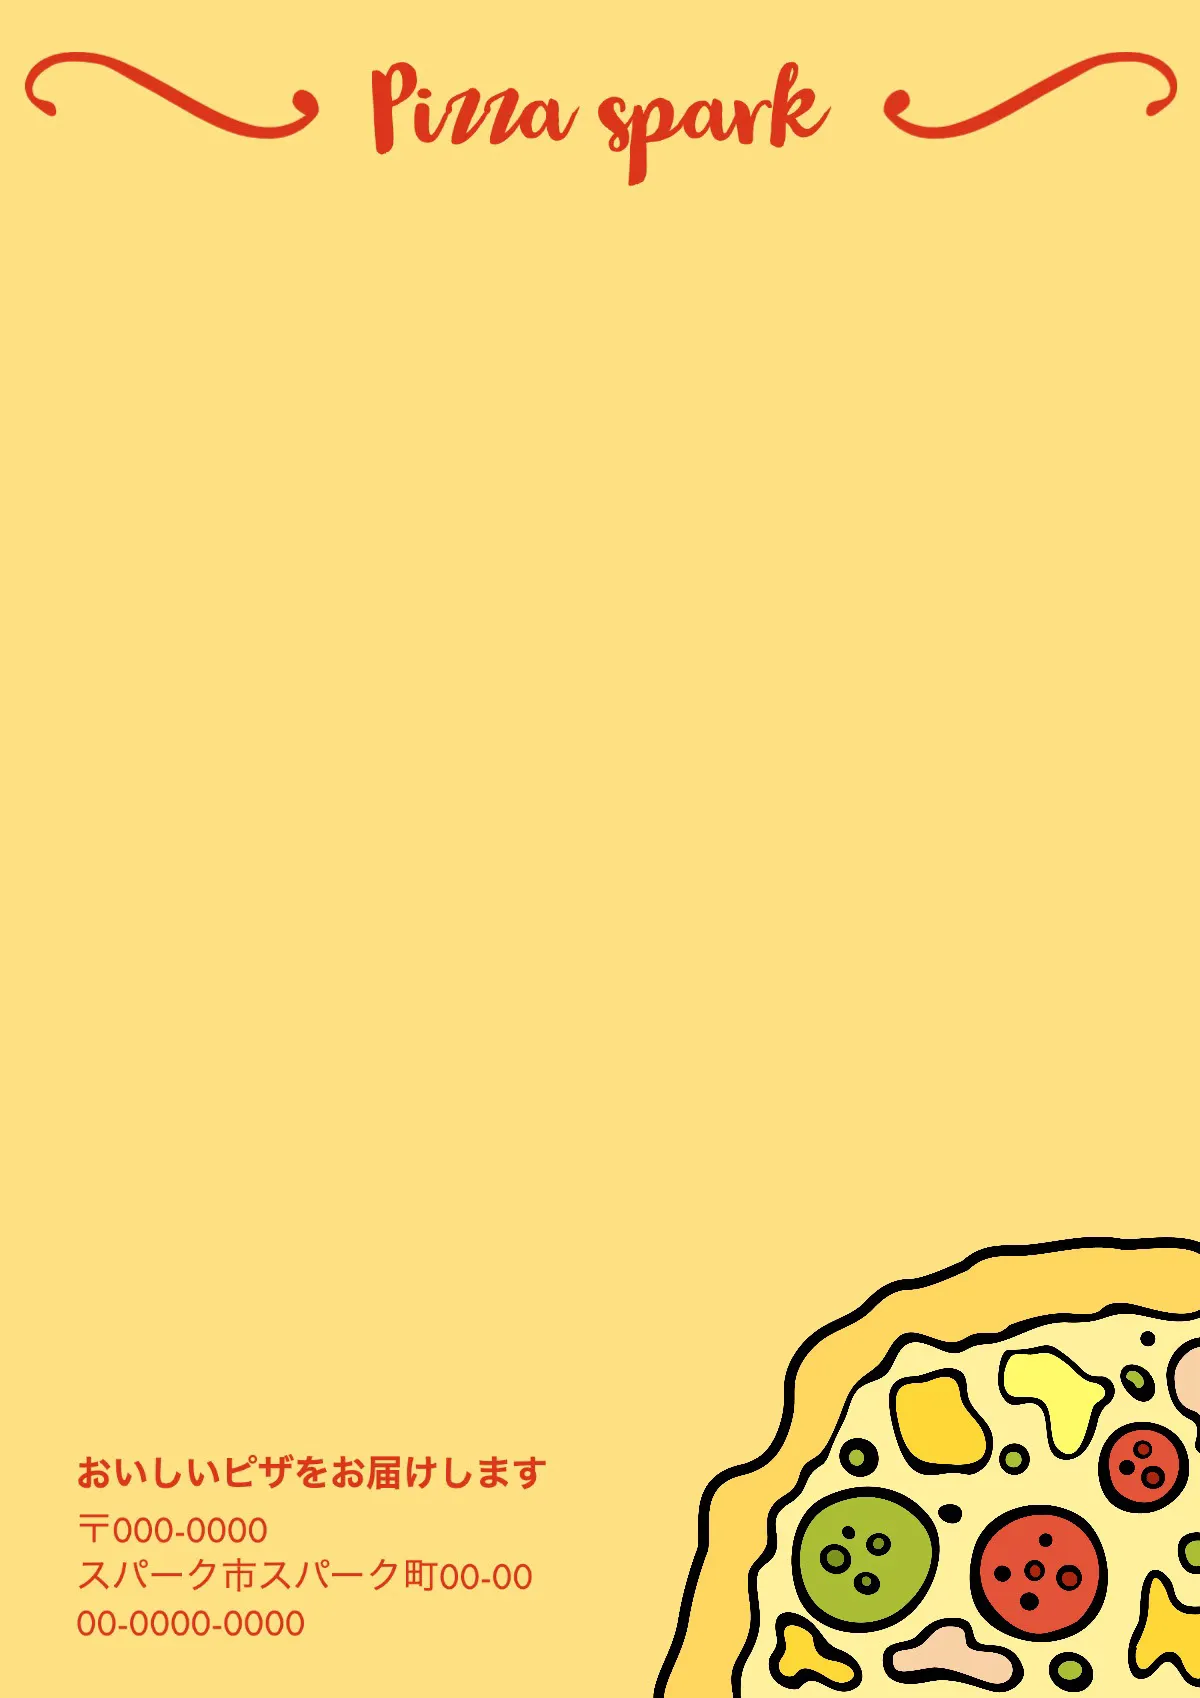 Pizza spark delivery yellow back